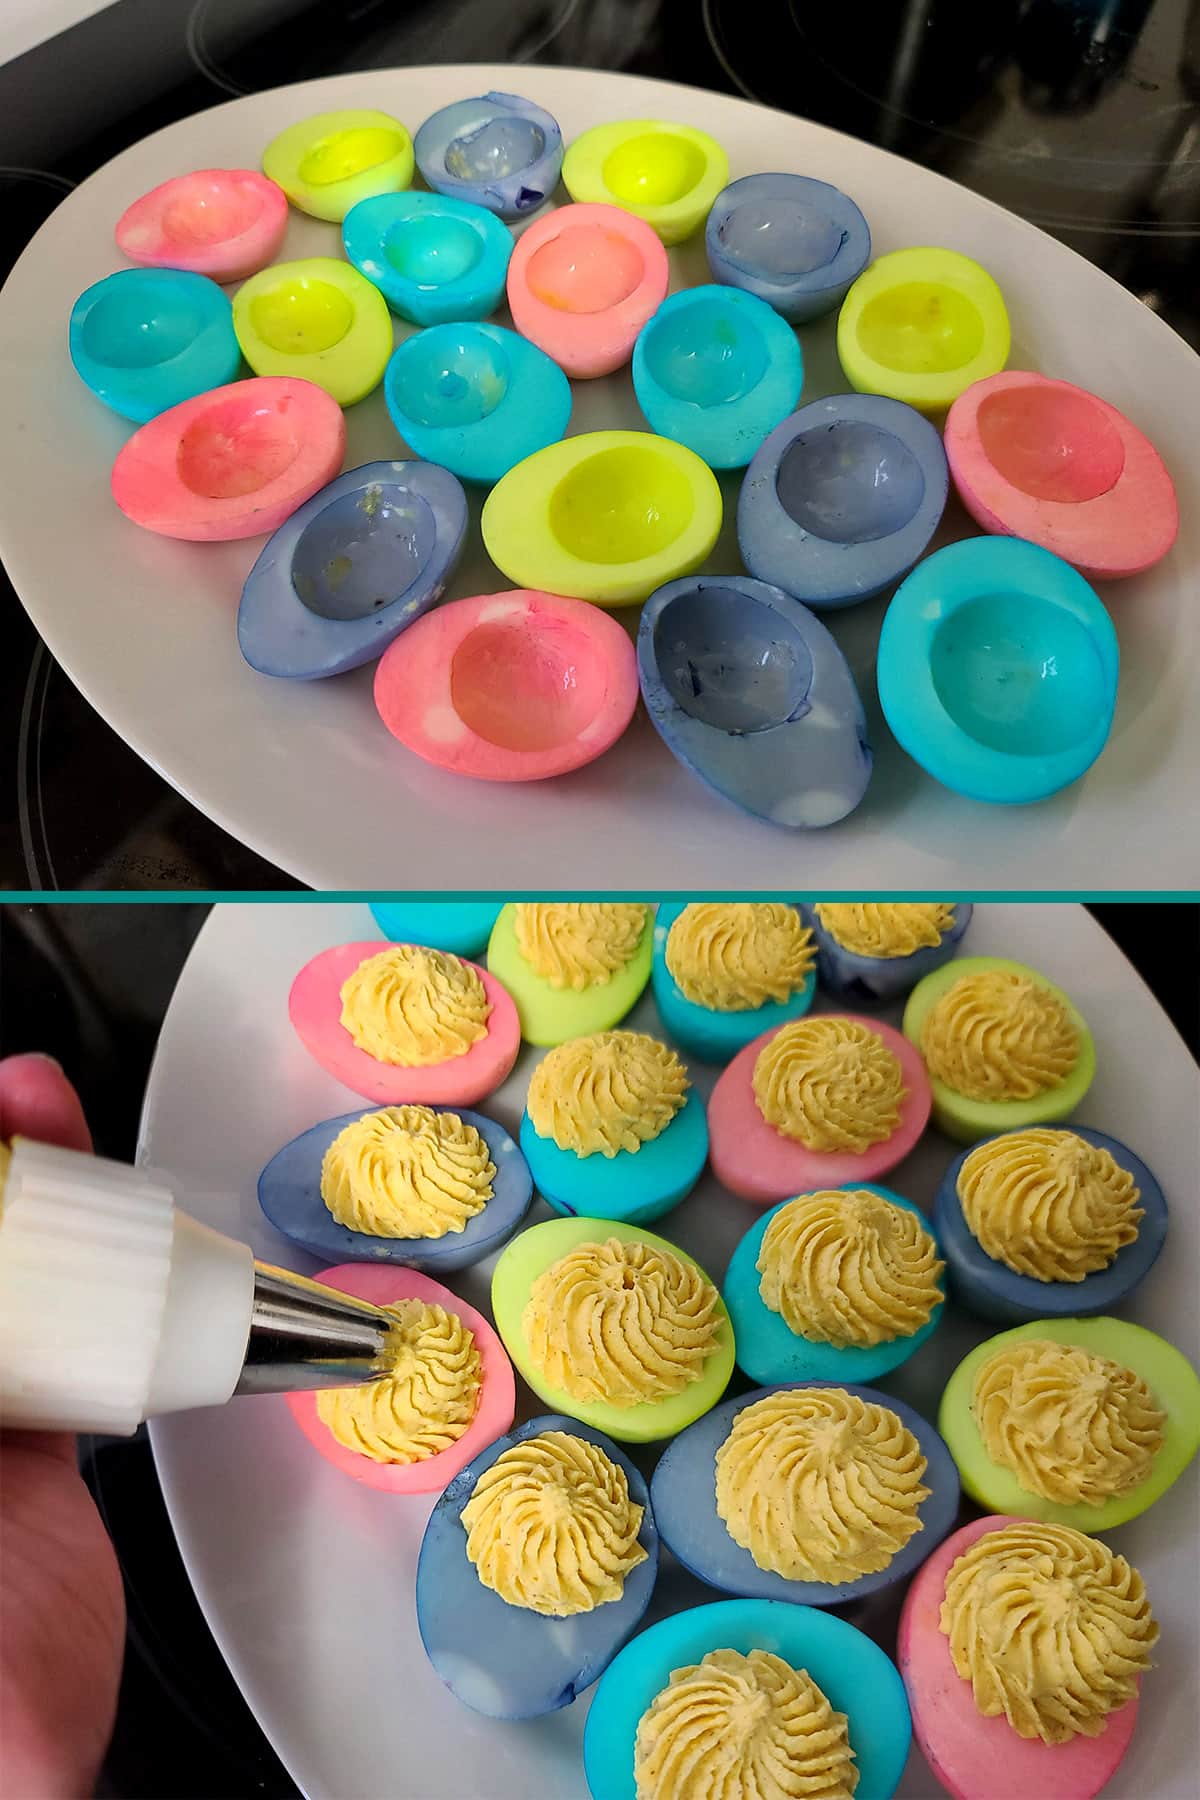 A 2 part image showing a serving platter of colored egg whites, before and after having the filling piped in them.